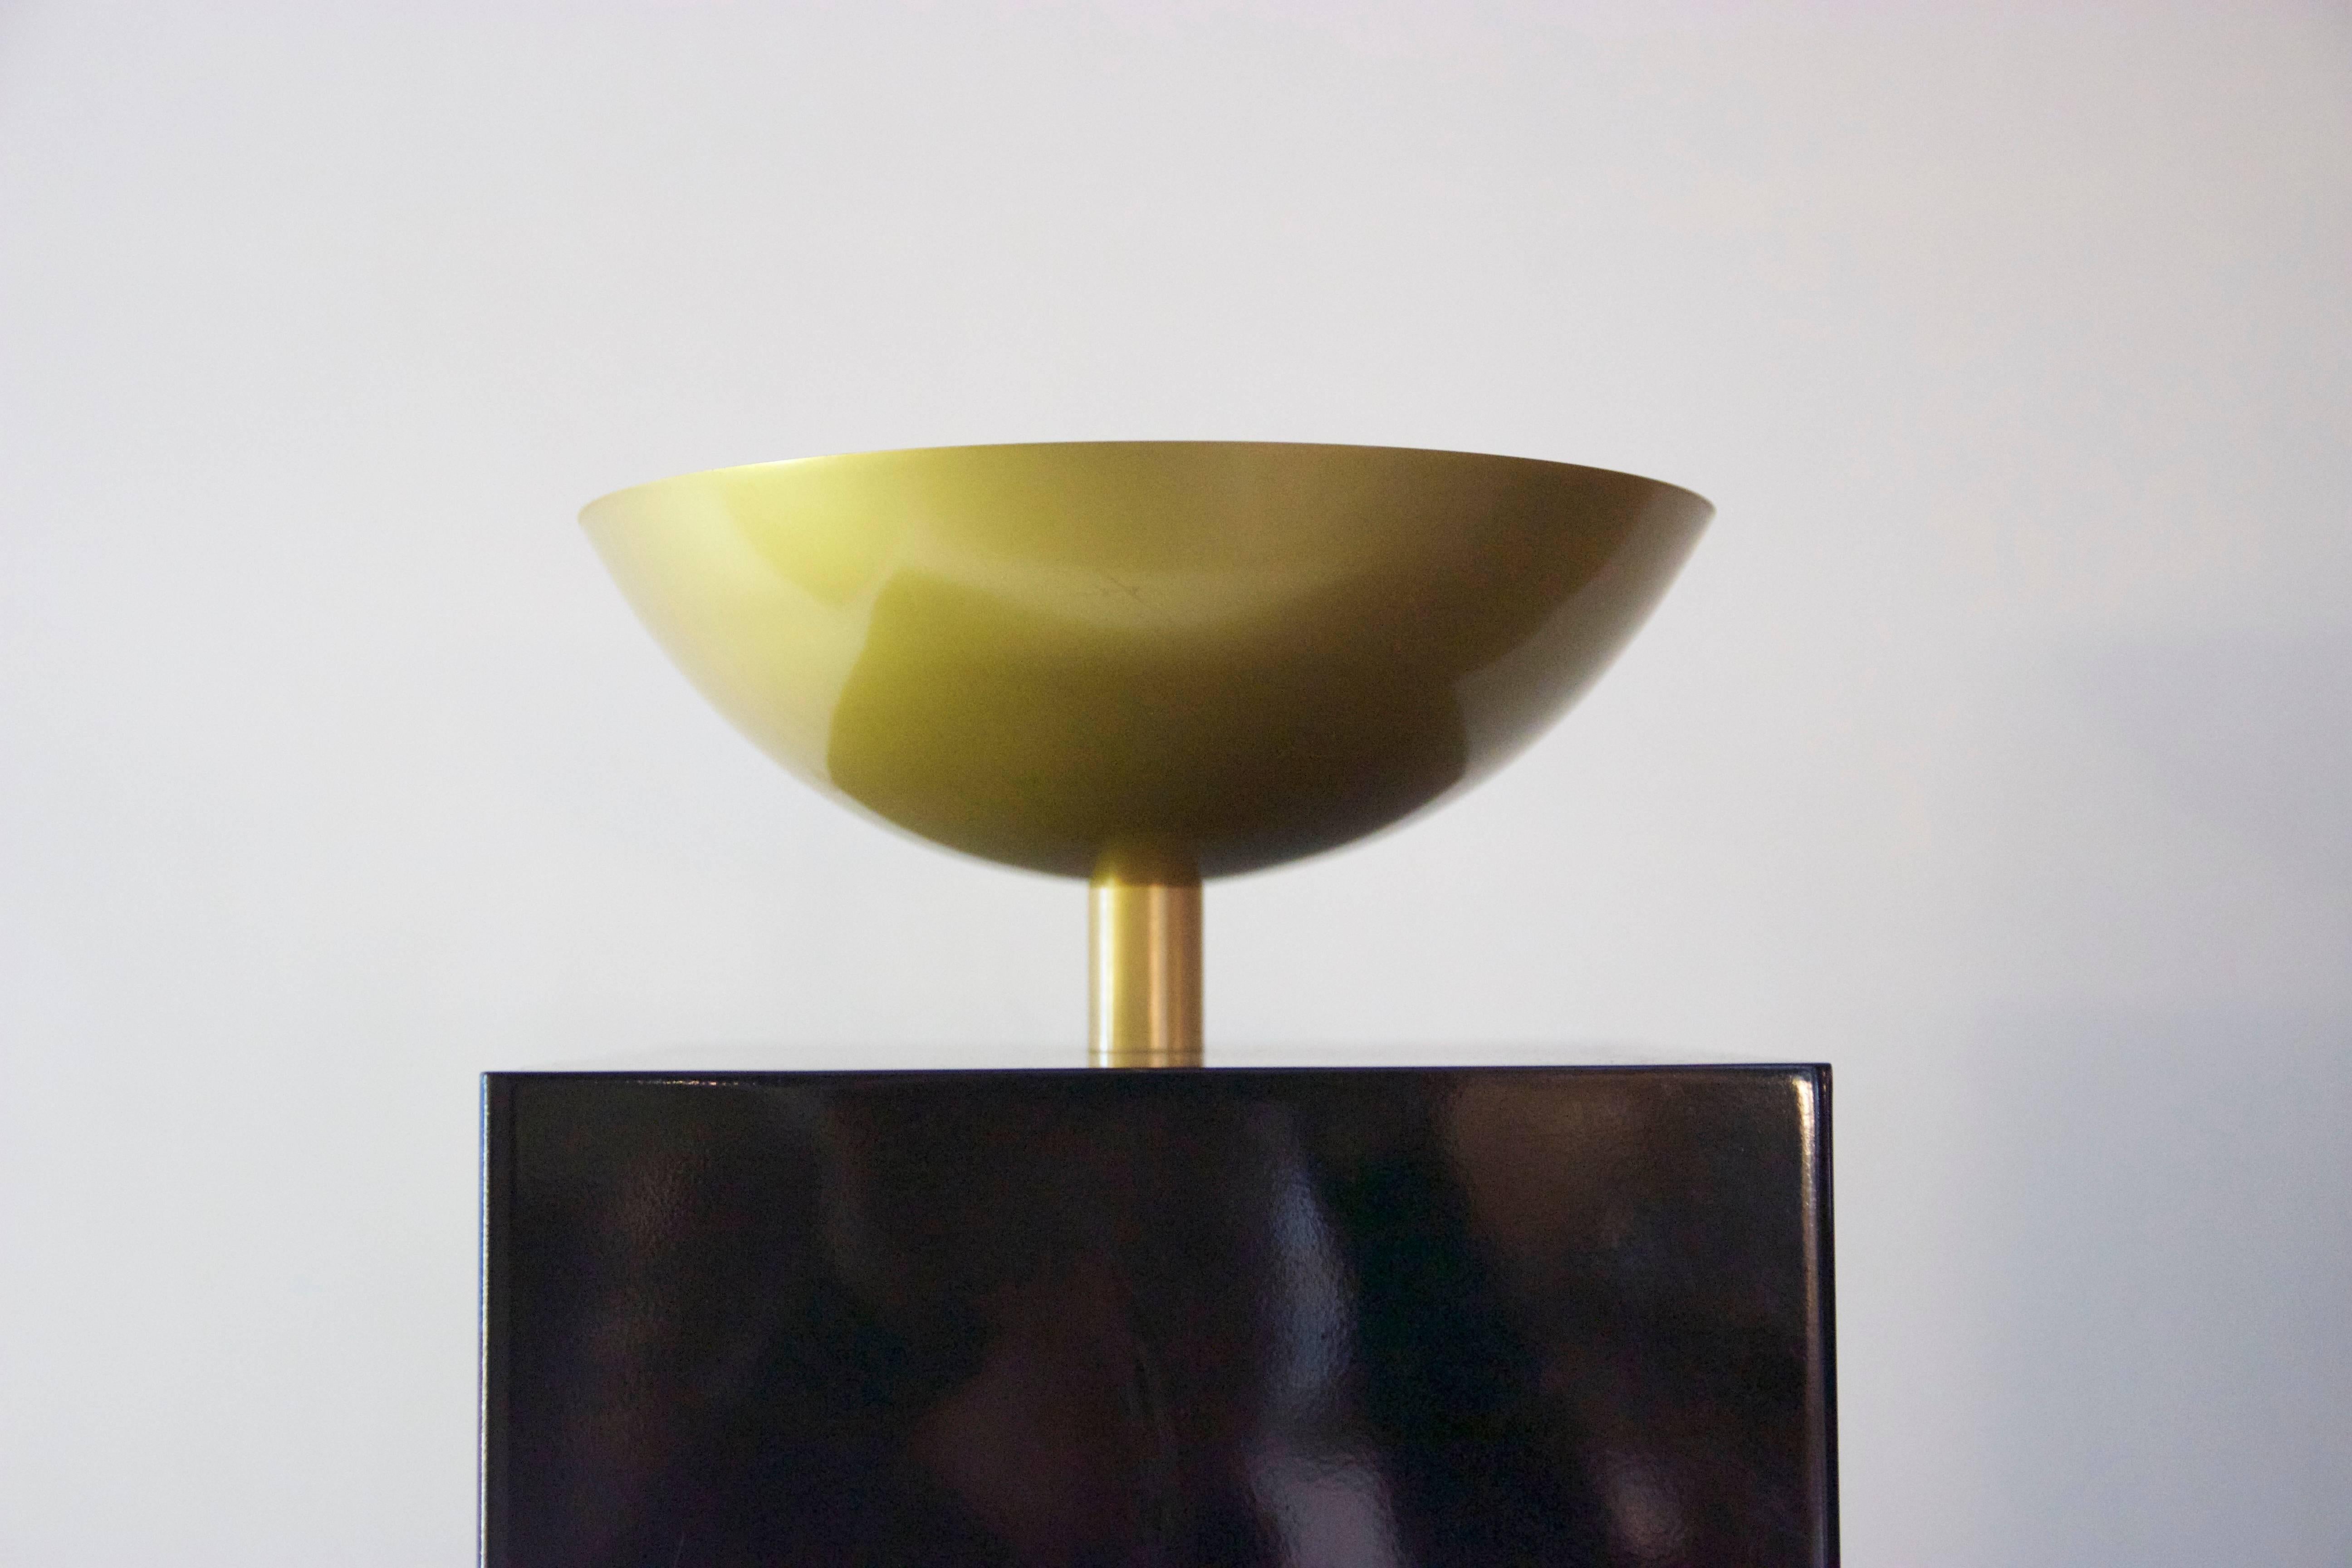 Michel Boyer, born in 1935,
pair of column lights,
square bolster in enameled black lacquered sheet metal with built-in dimmer pushbutton
chrome steel cup,
circa 1970, France.
Measures: Height 175 cm, width 22 cm, depth 22 cm.